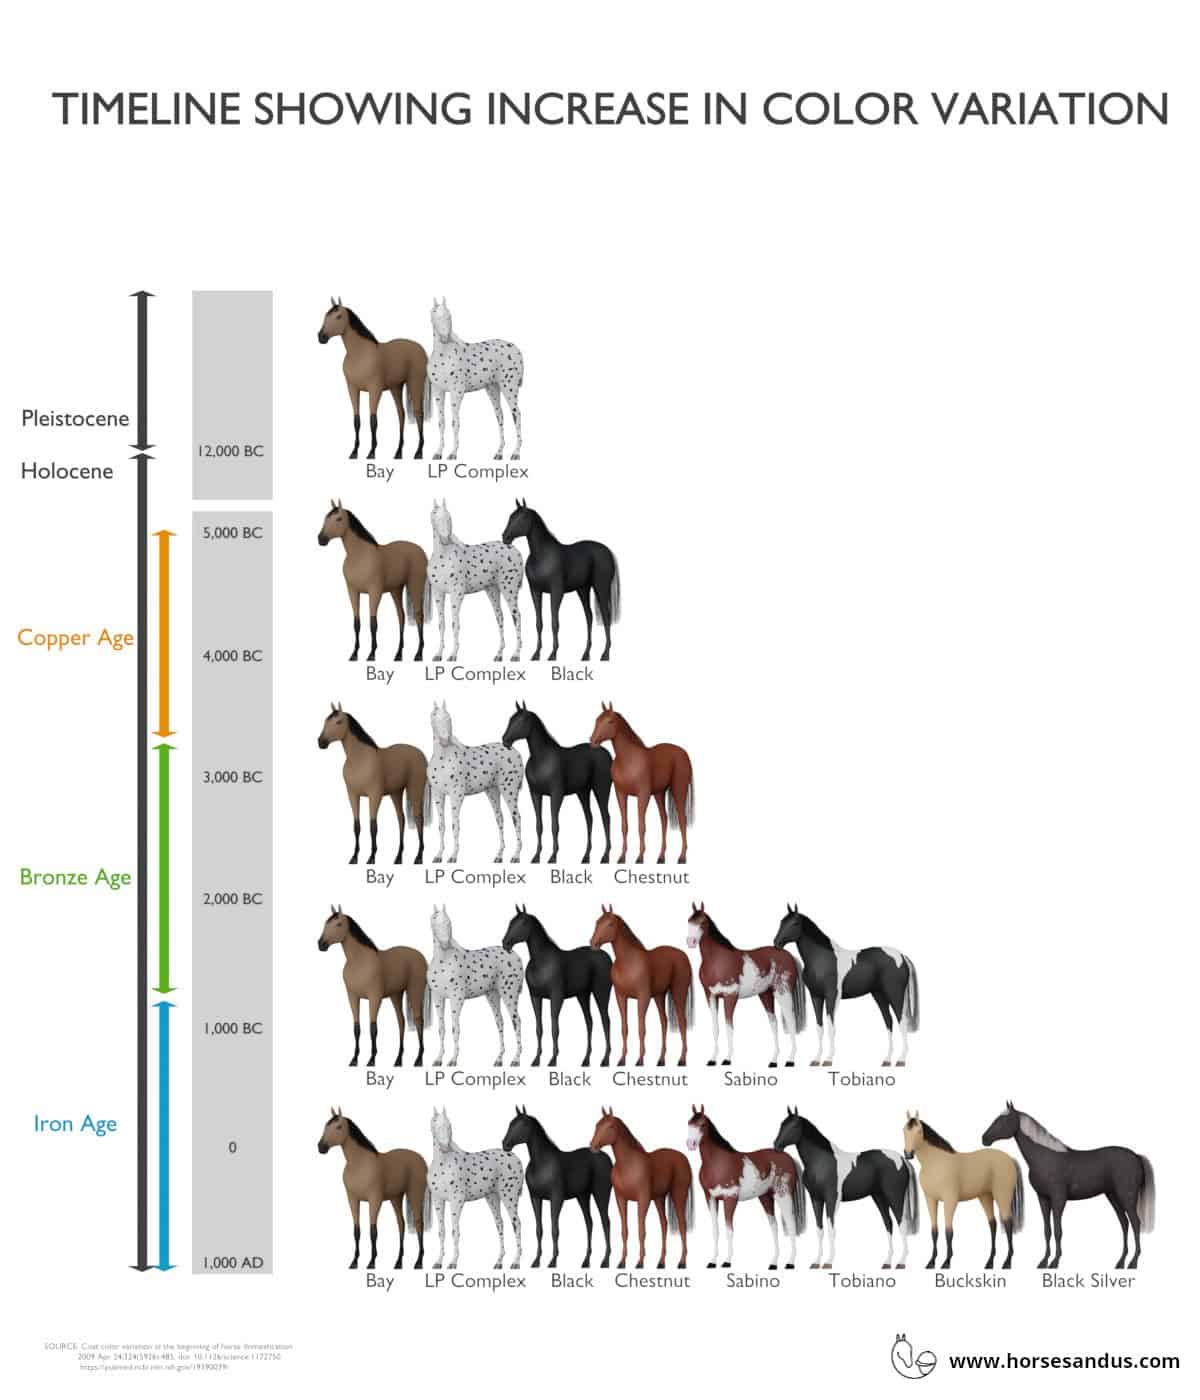 Horse Colors and Patterns - timeline of increasing color variation